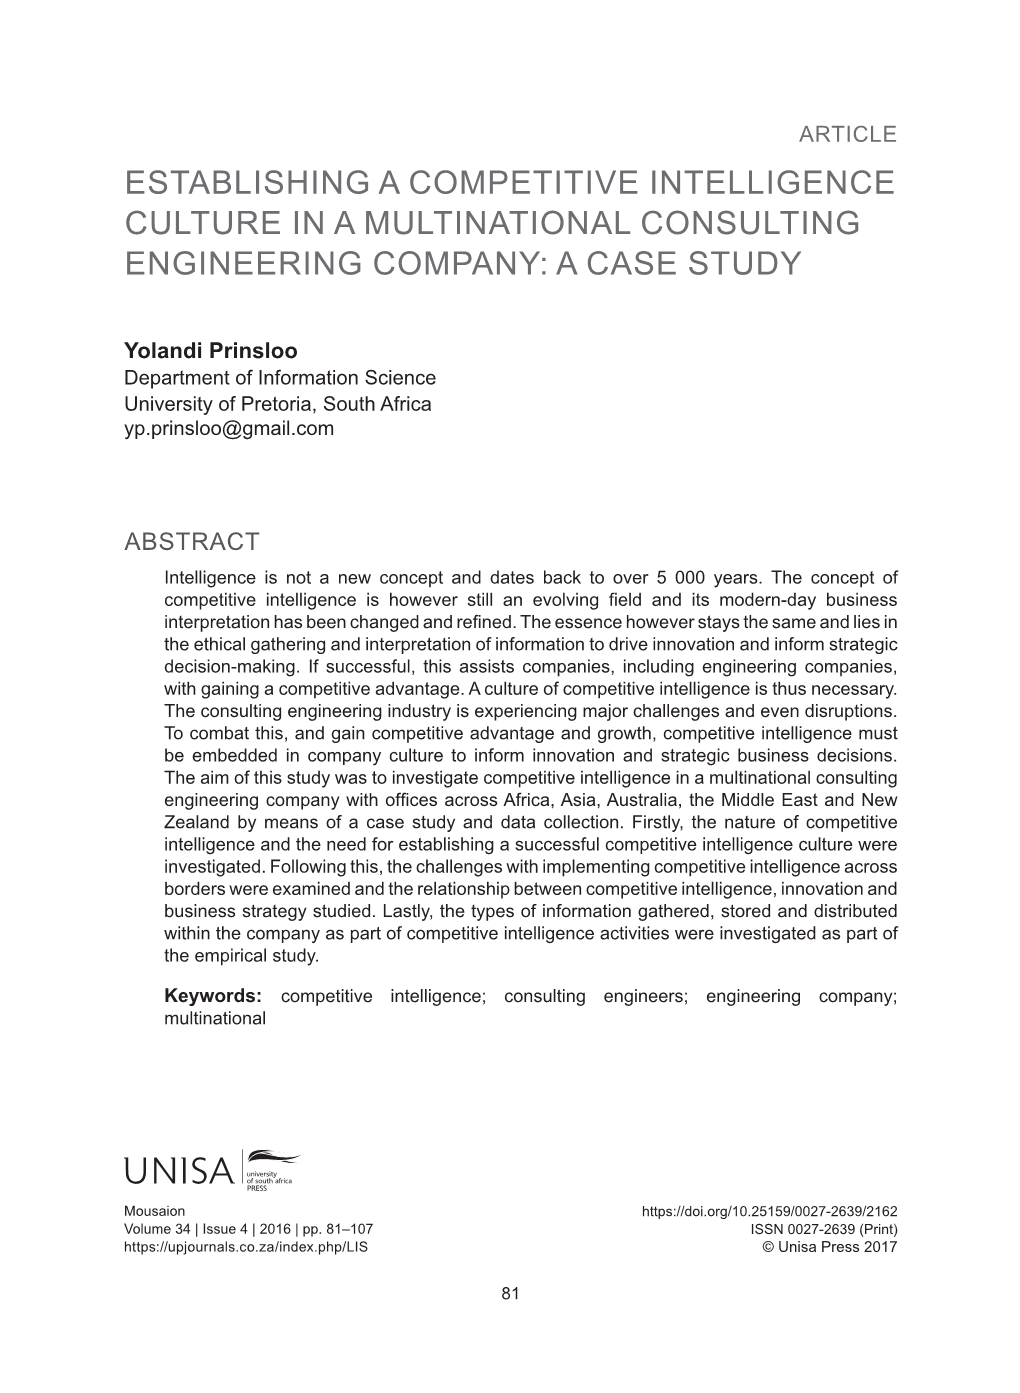 Establishing a Competitive Intelligence Culture in a Multinational Consulting Engineering Company: a Case Study